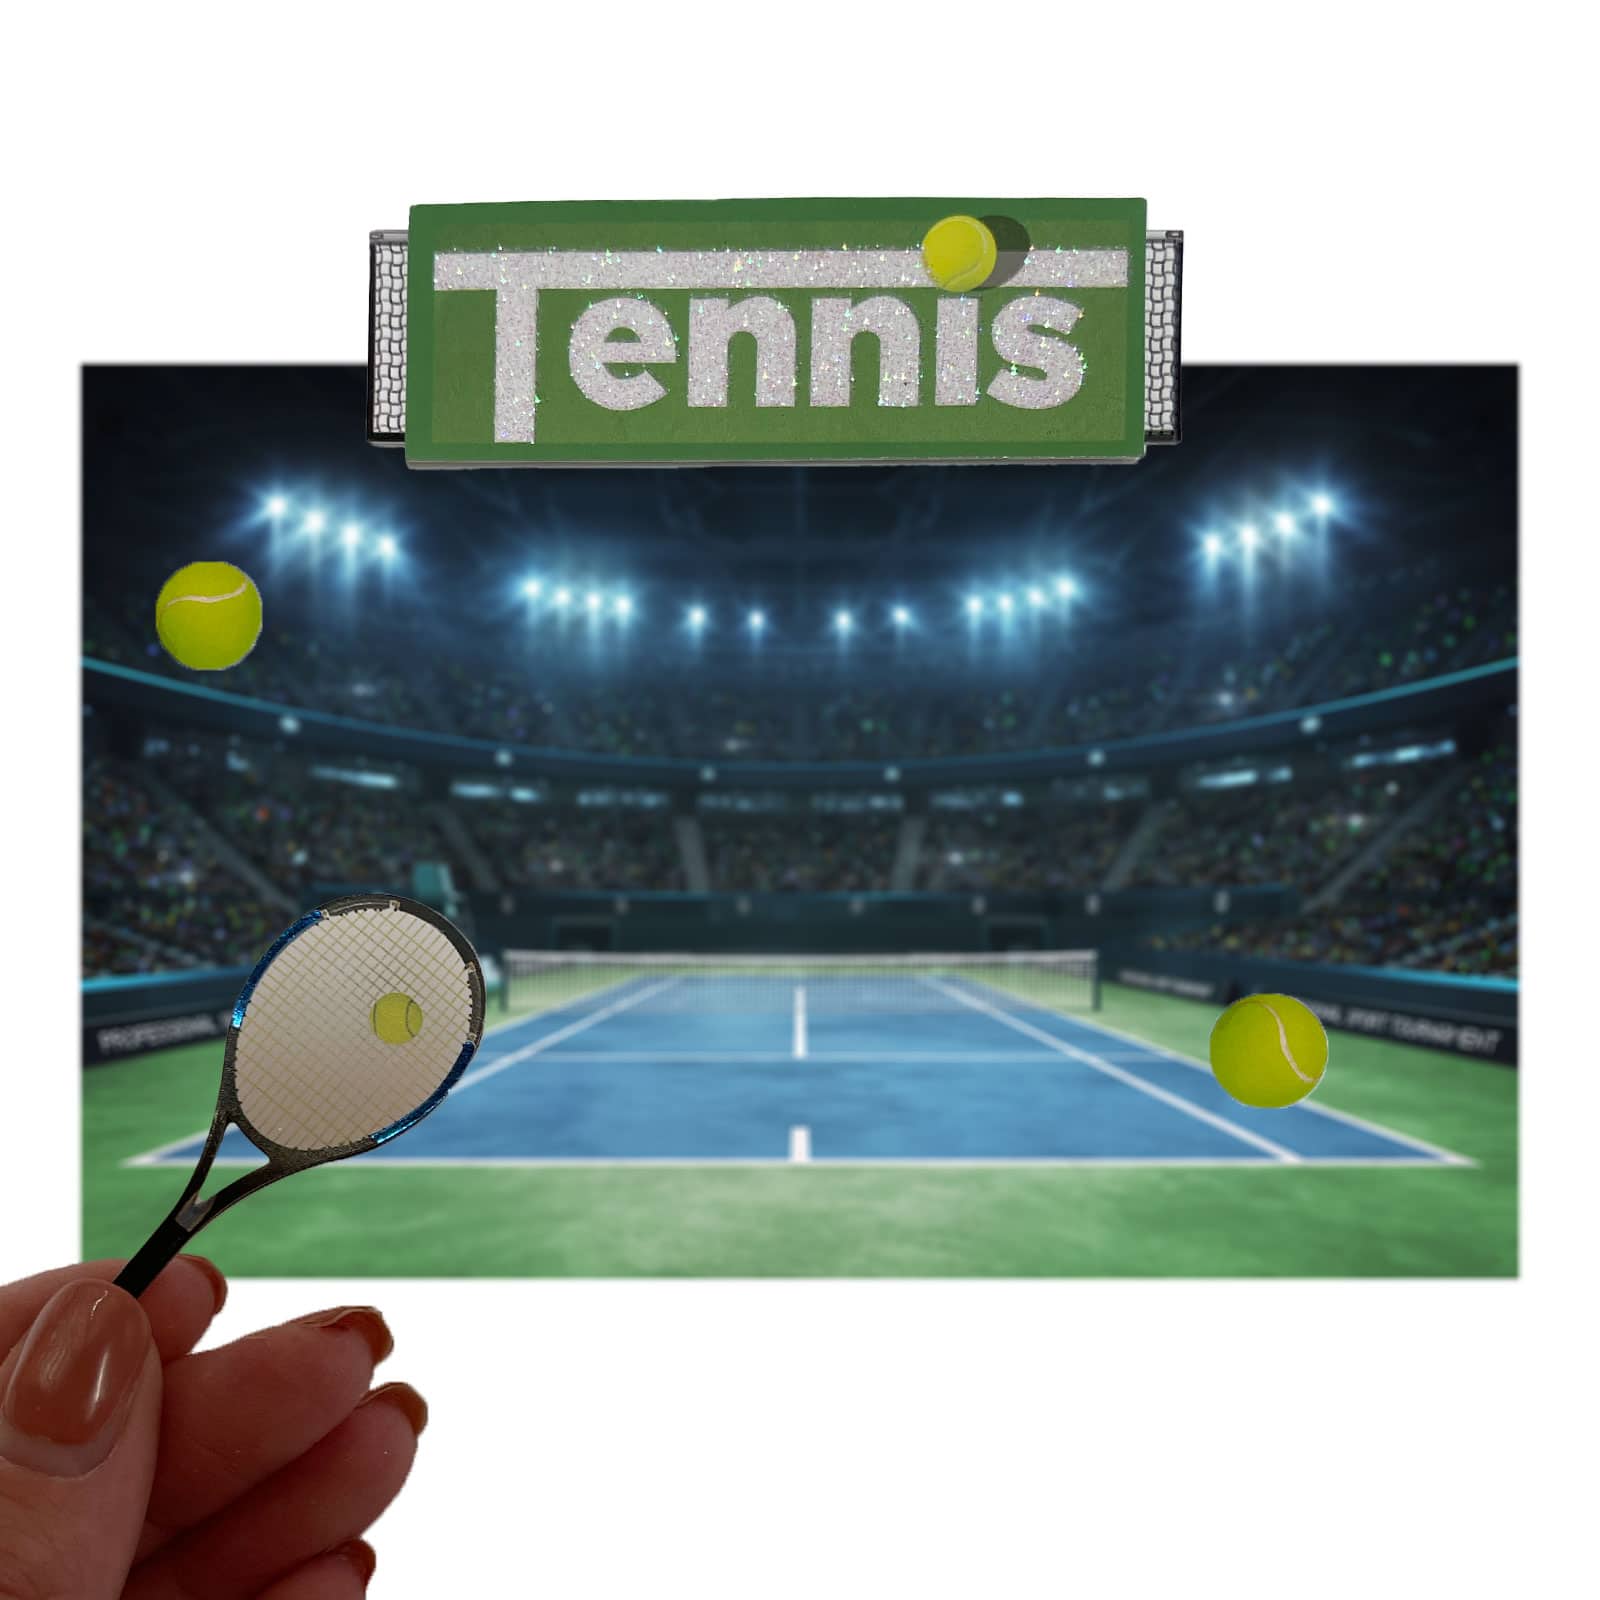 12 Pack: Tennis Stickers by Recollections&#x2122;